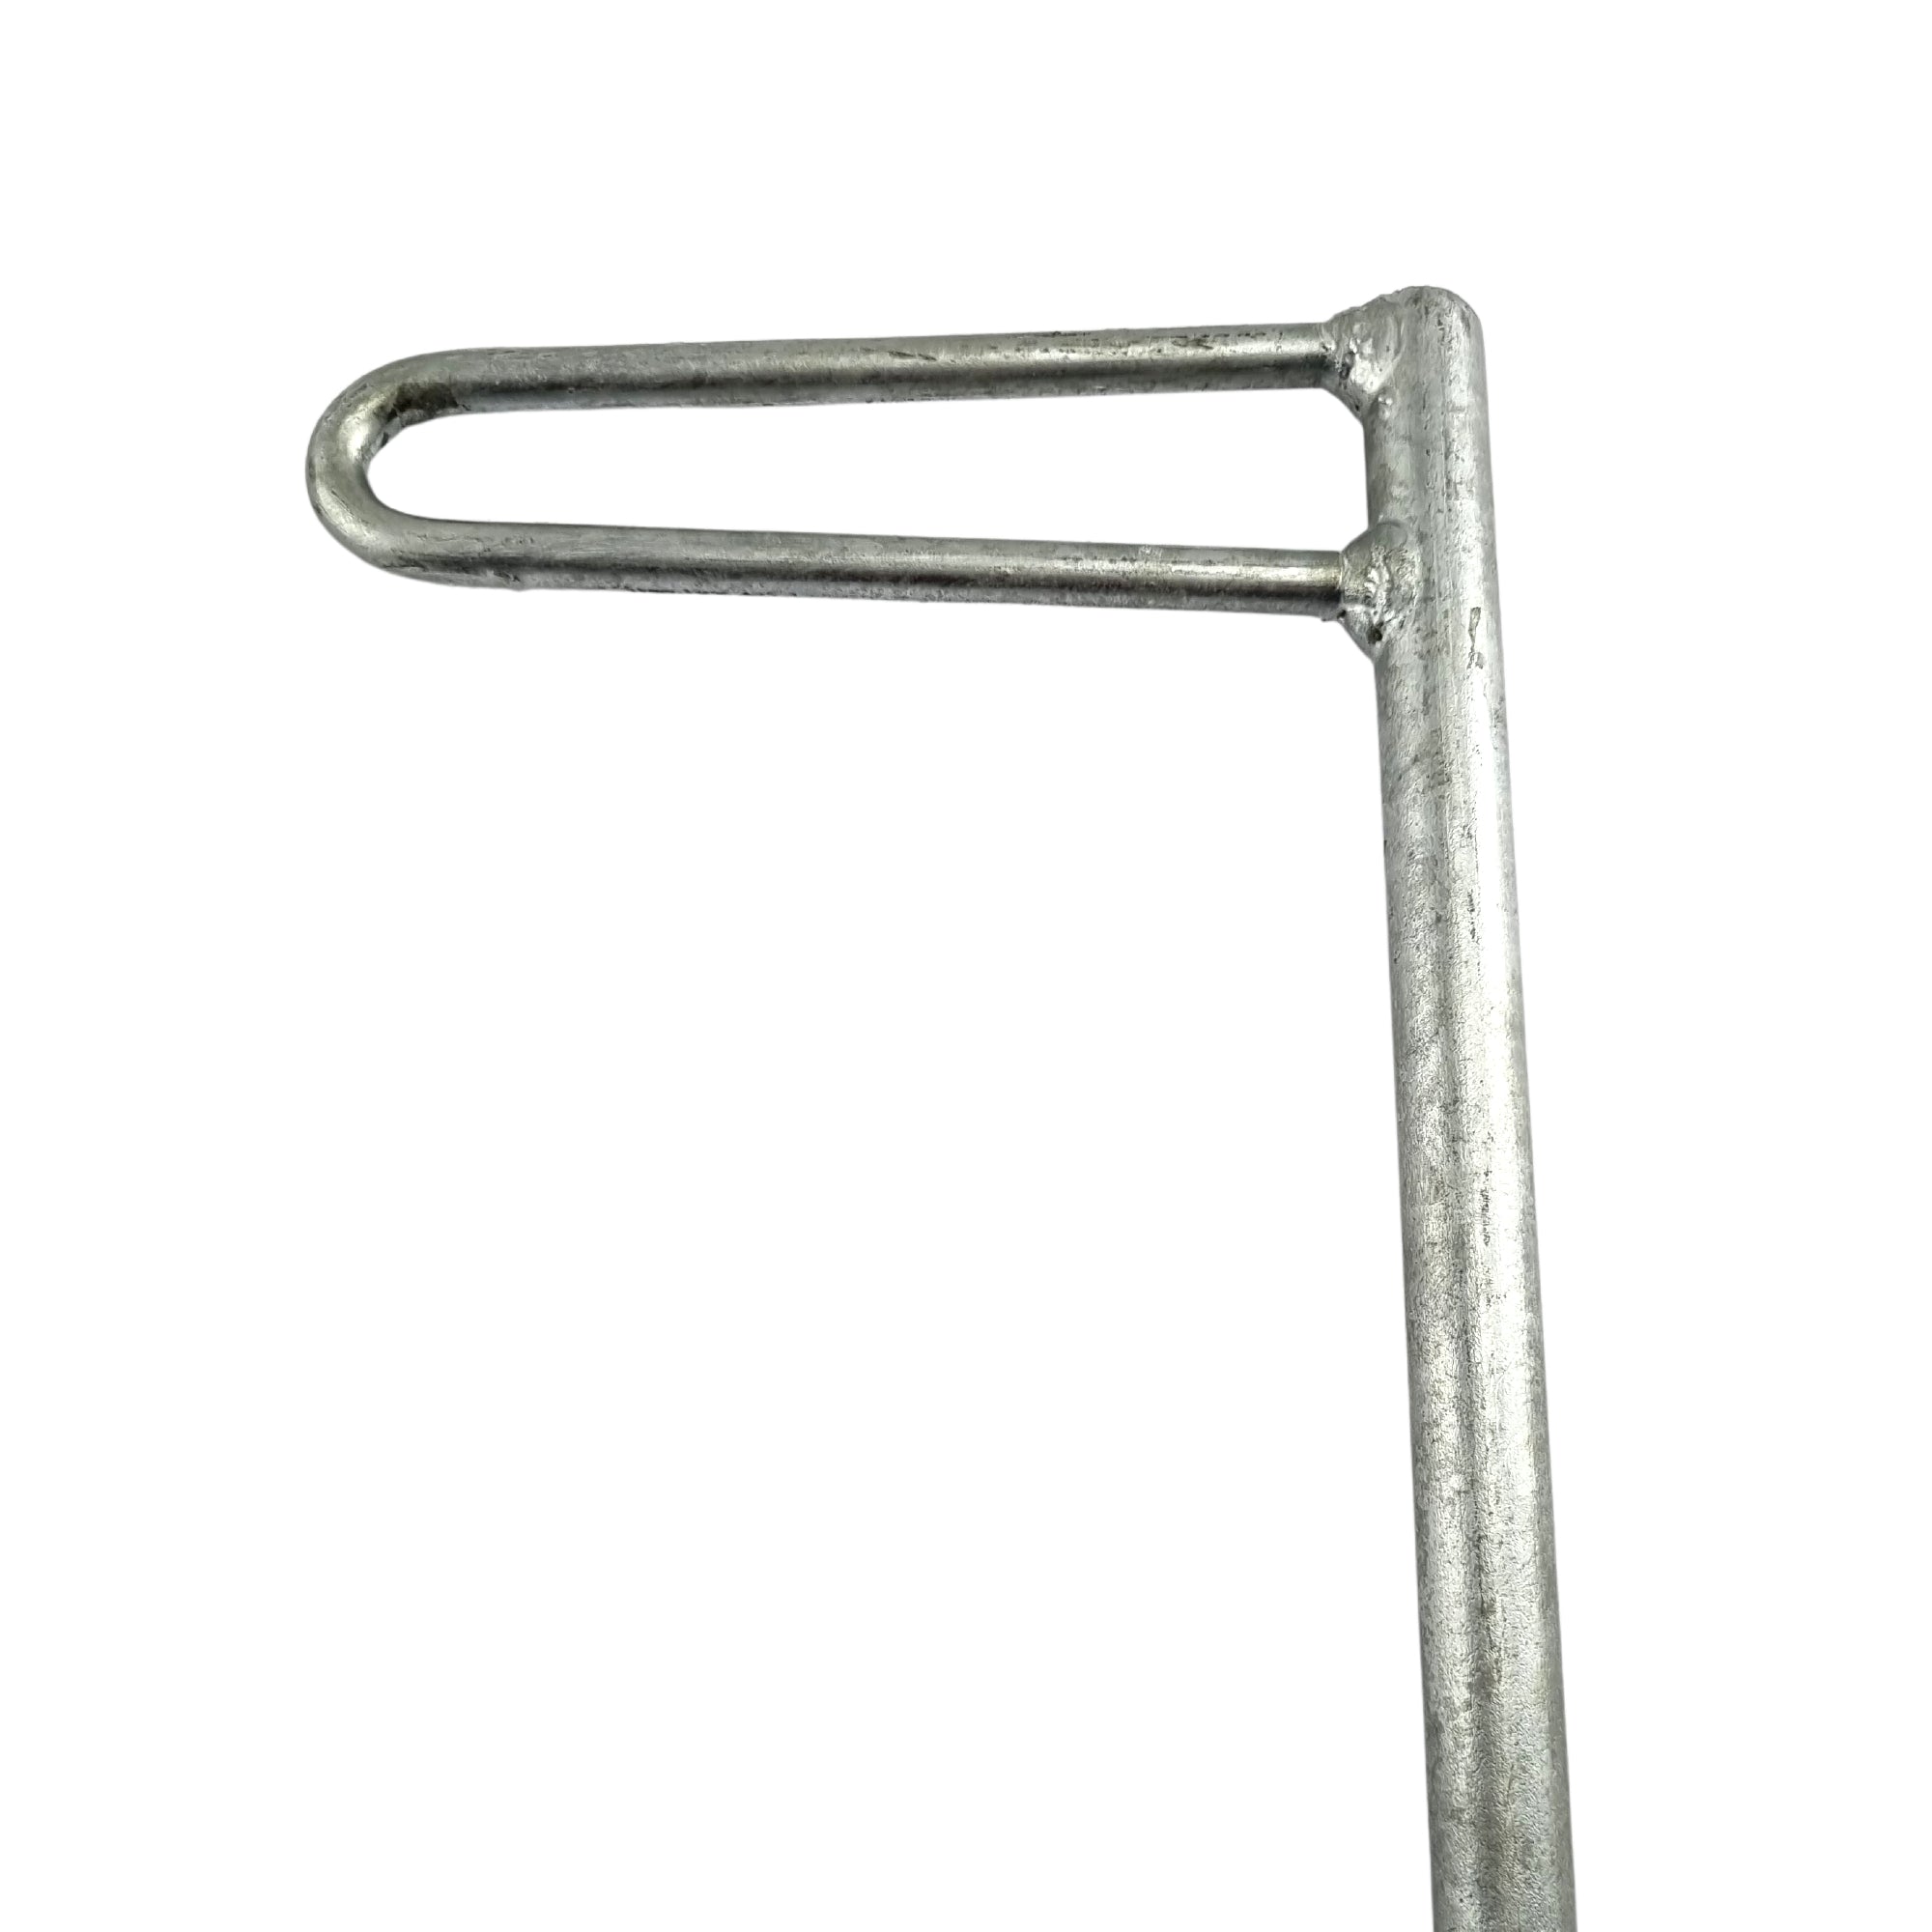 Flag Pin Drop Bolt - Galvanised. Australian Made. Australia wide shipping + Melbourne pick-up. Shop Fence and Gate Fittings: Chain.com.au